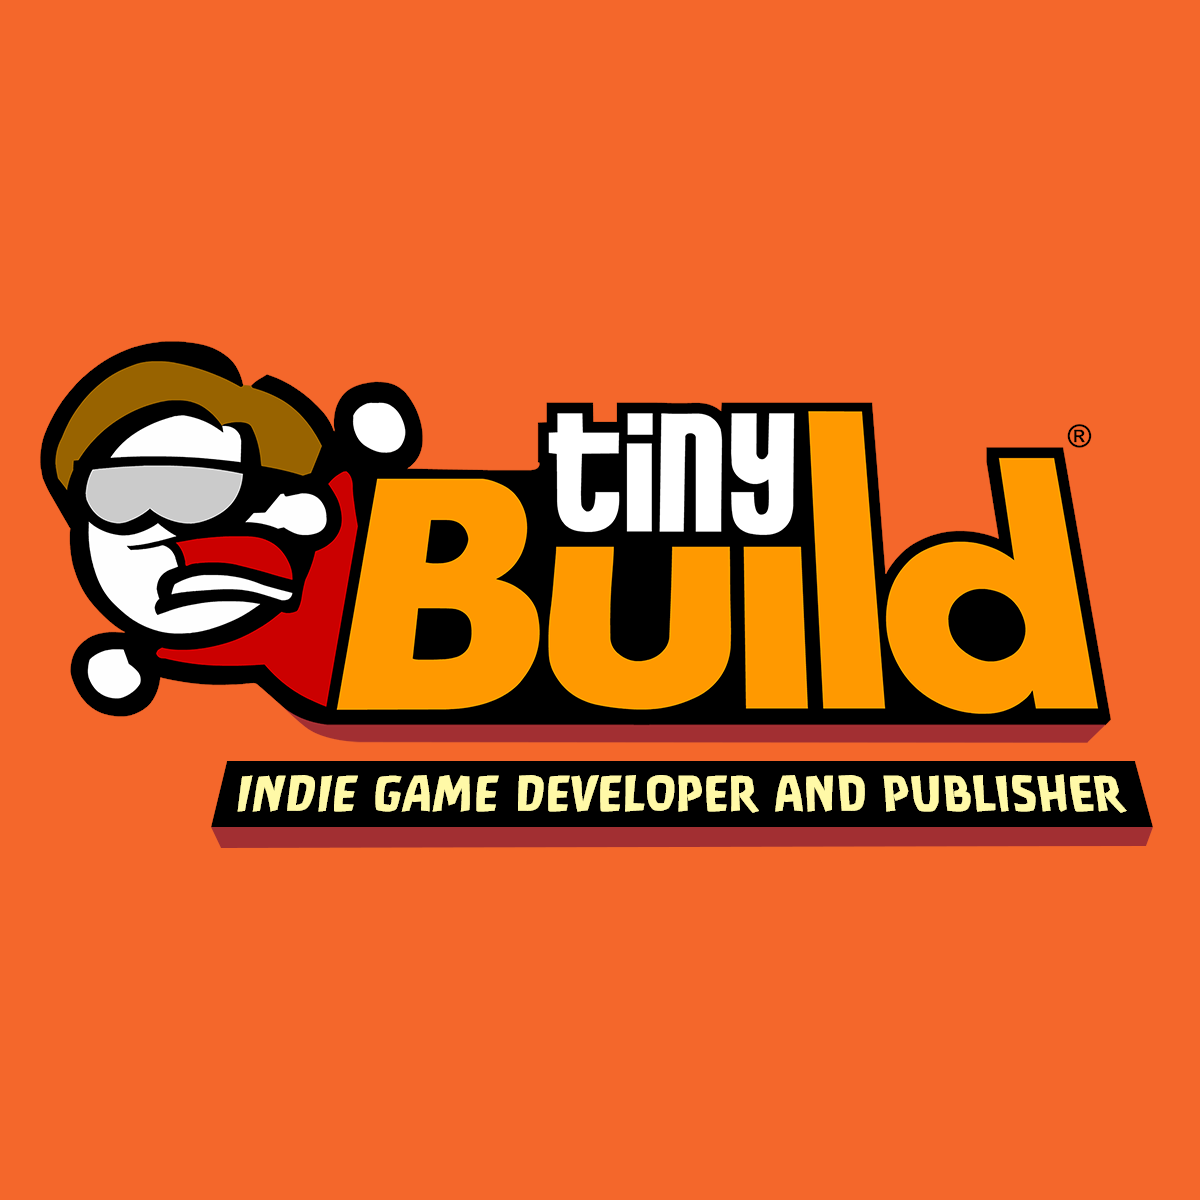 Image for tinyBuild CEO clears confusion on DRM stance after one rep says it's "not smart business"